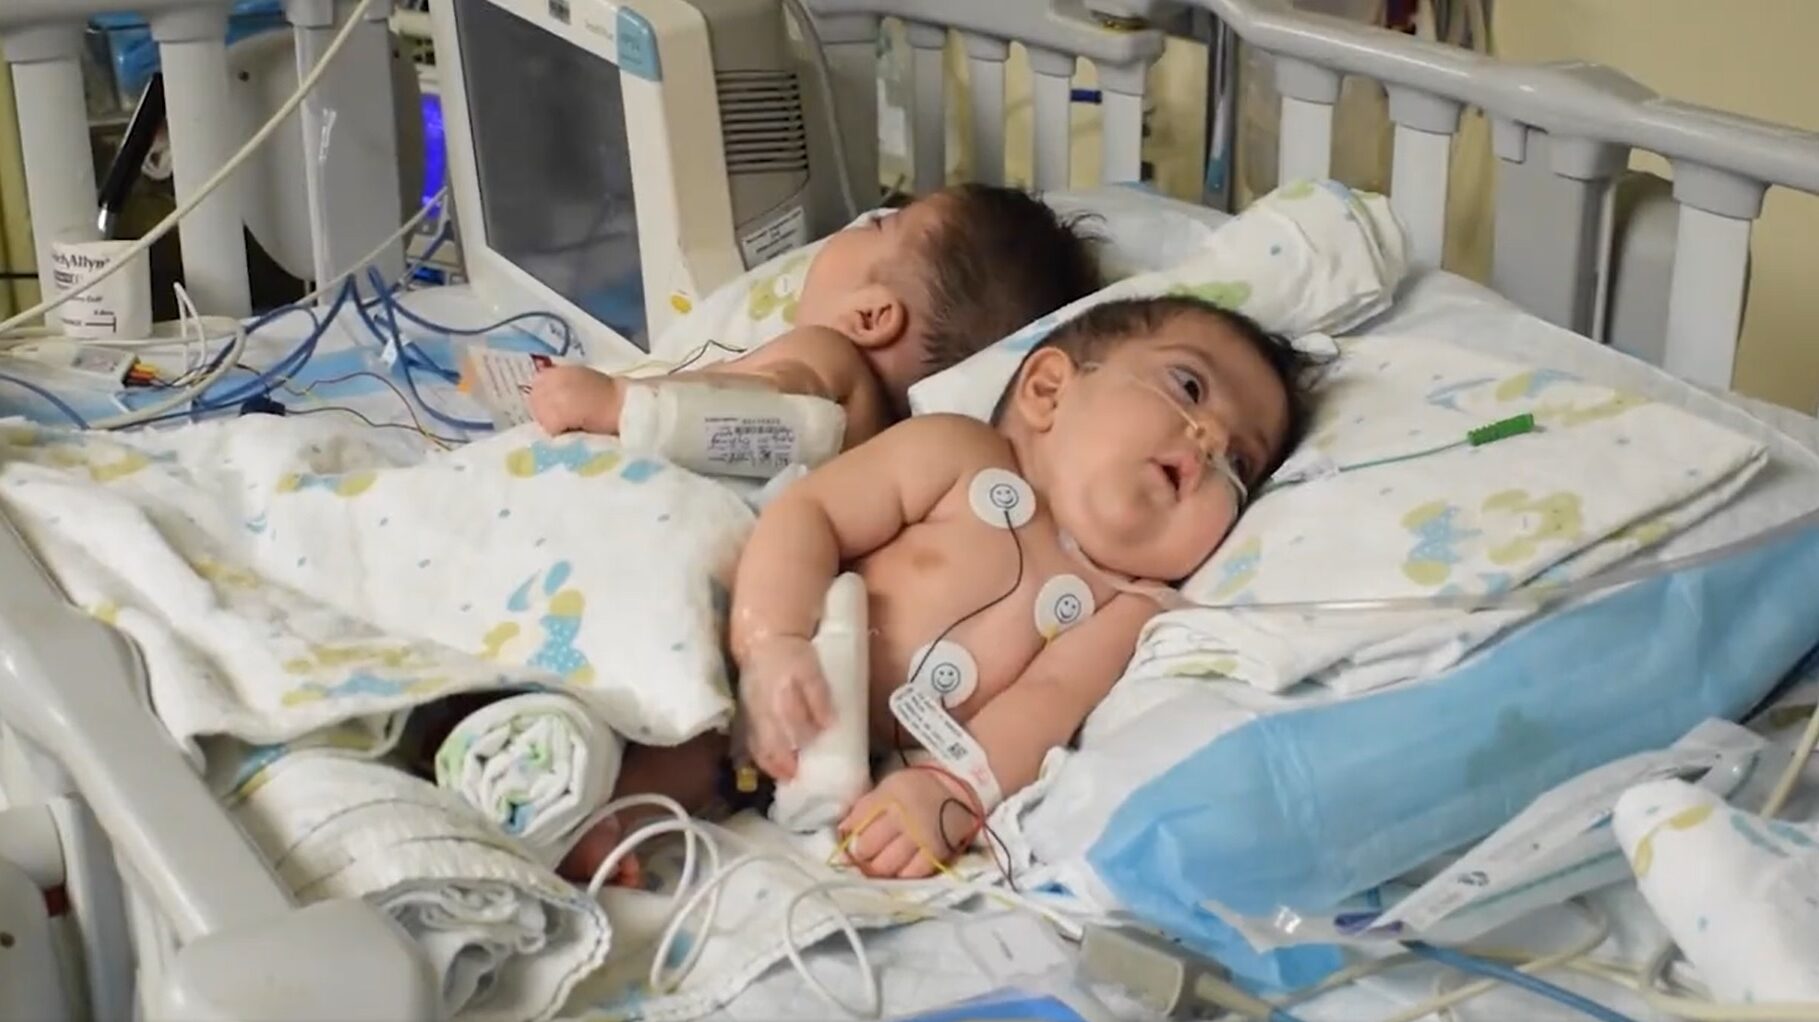 Doctors Perform First Separation of Conjoined Twins in Lebanon